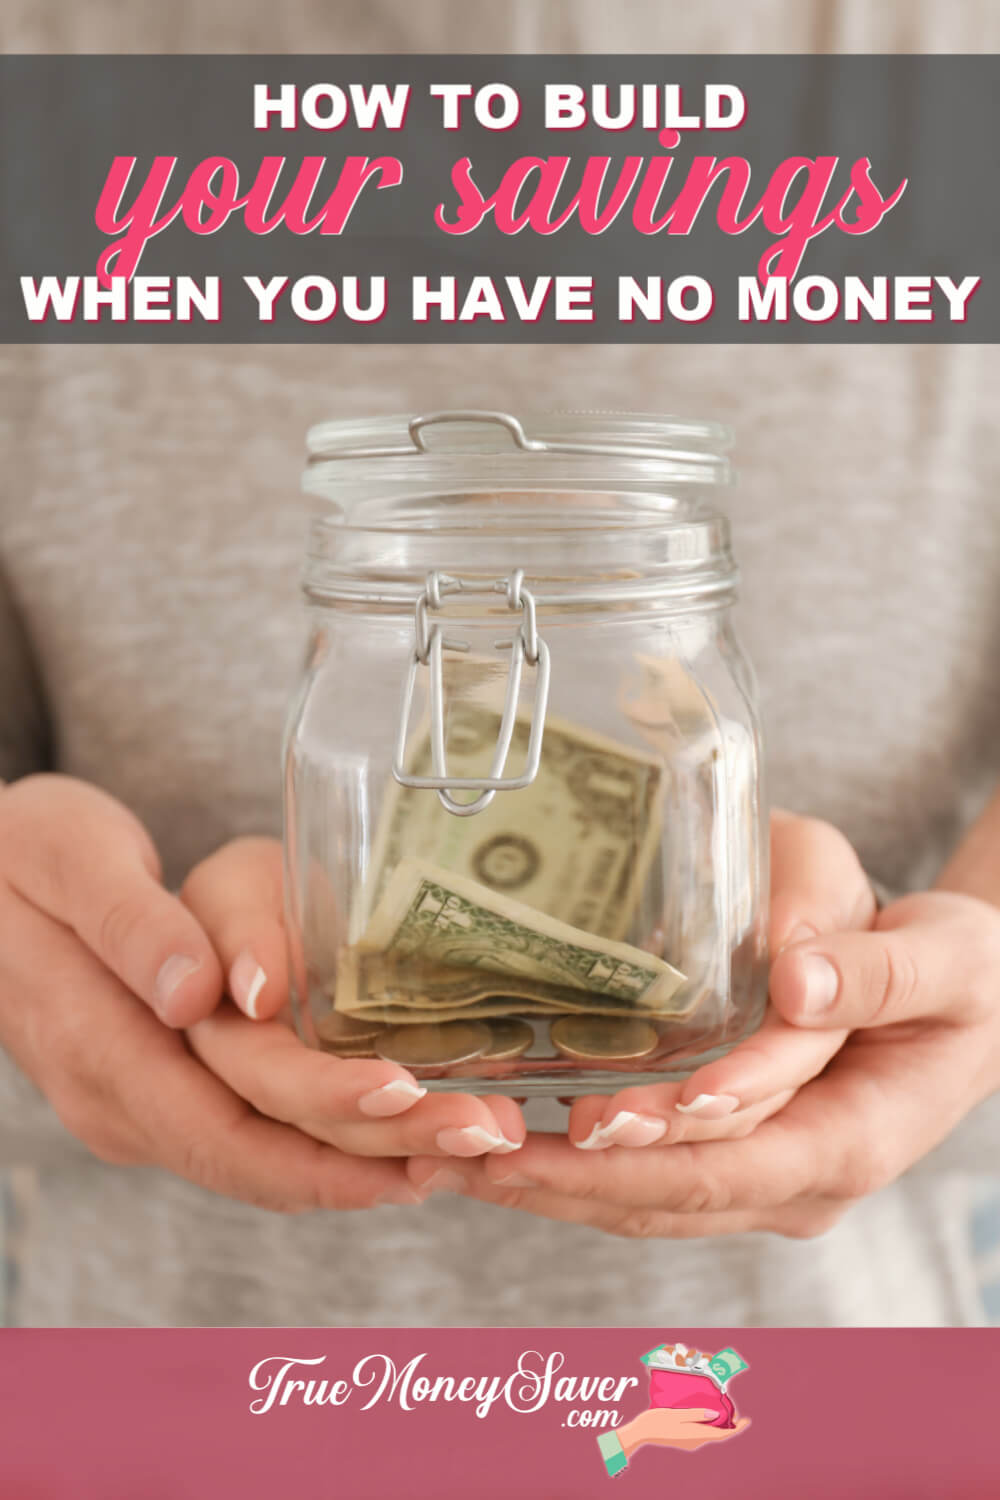 How To Build A Savings Account When You Have No Money